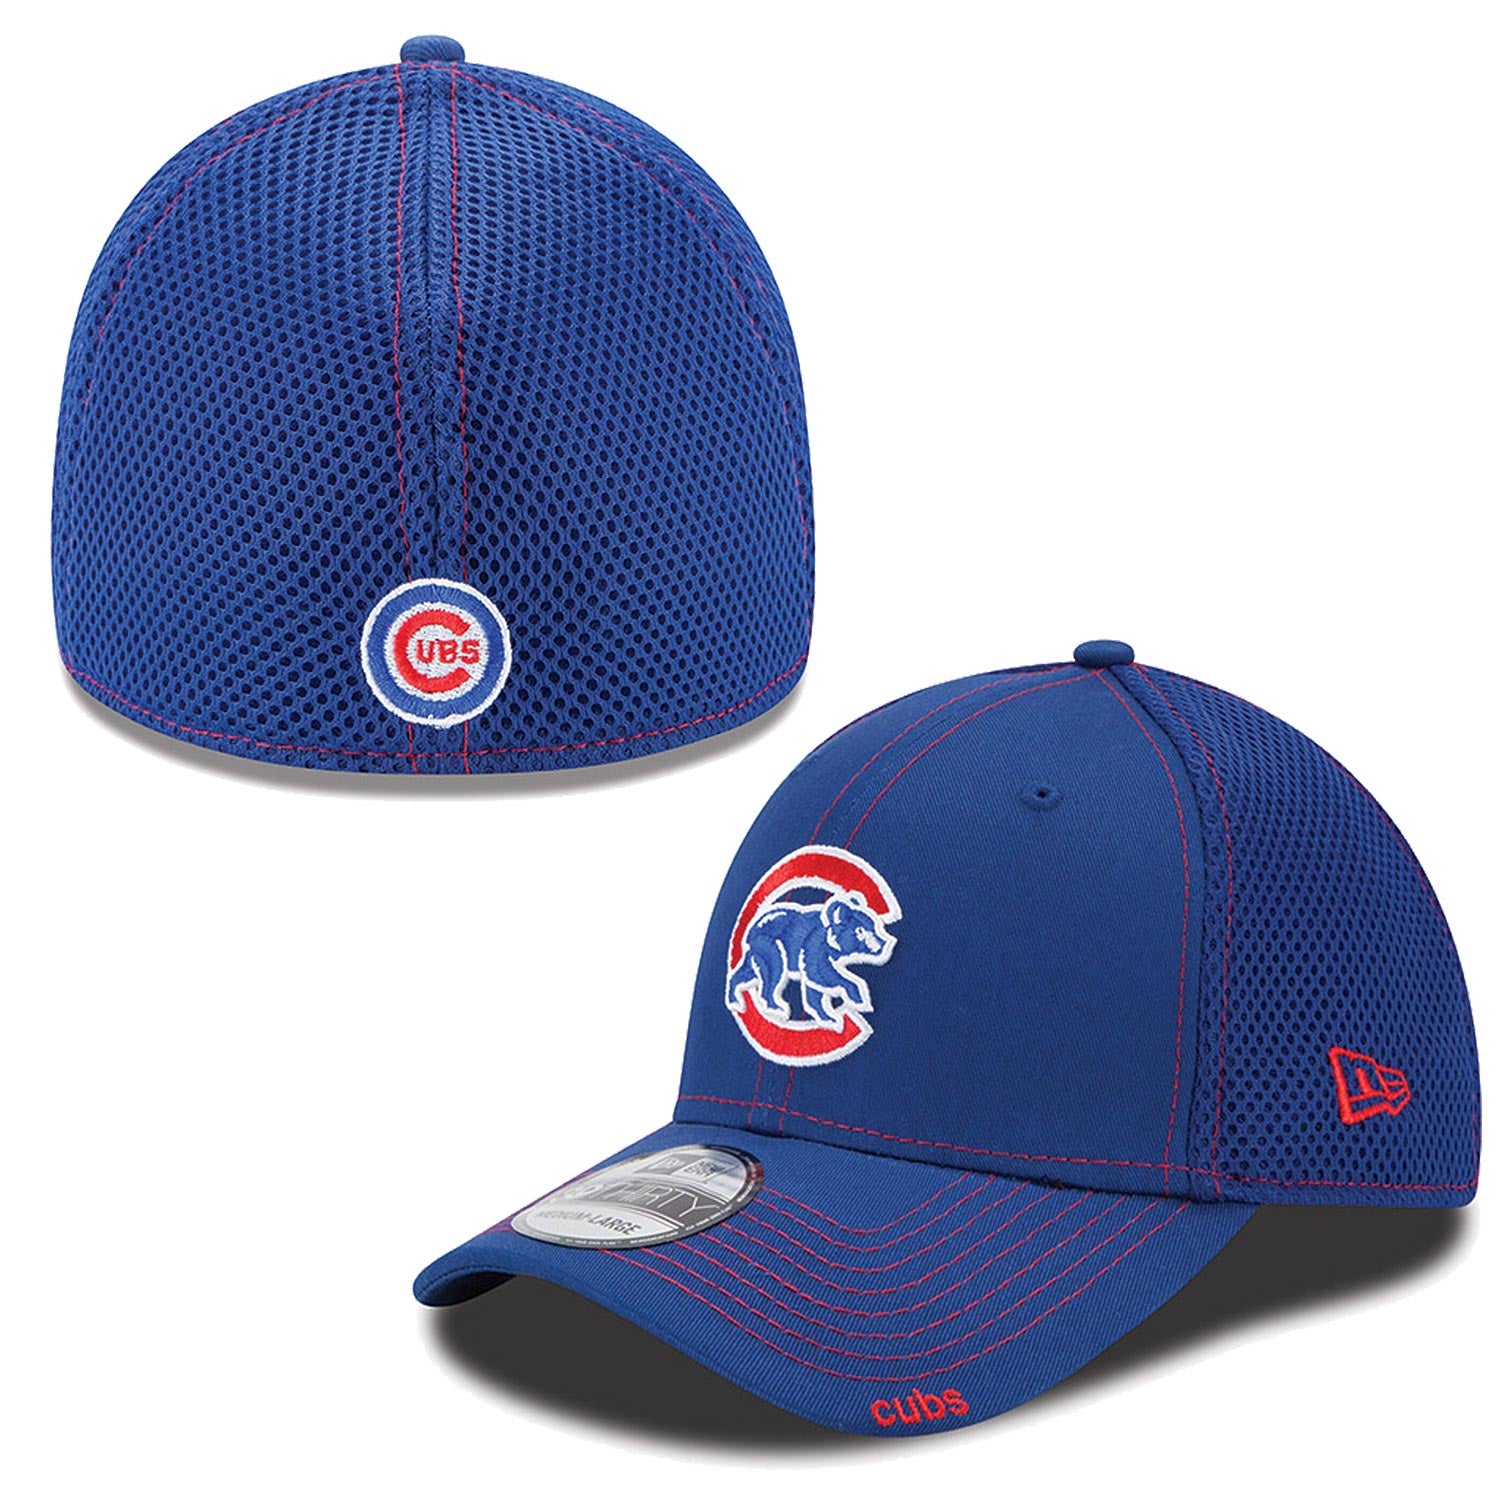 Chicago Cubs New Era Mascot Neo 39THIRTY Flex Hat - Royal Blue/Red